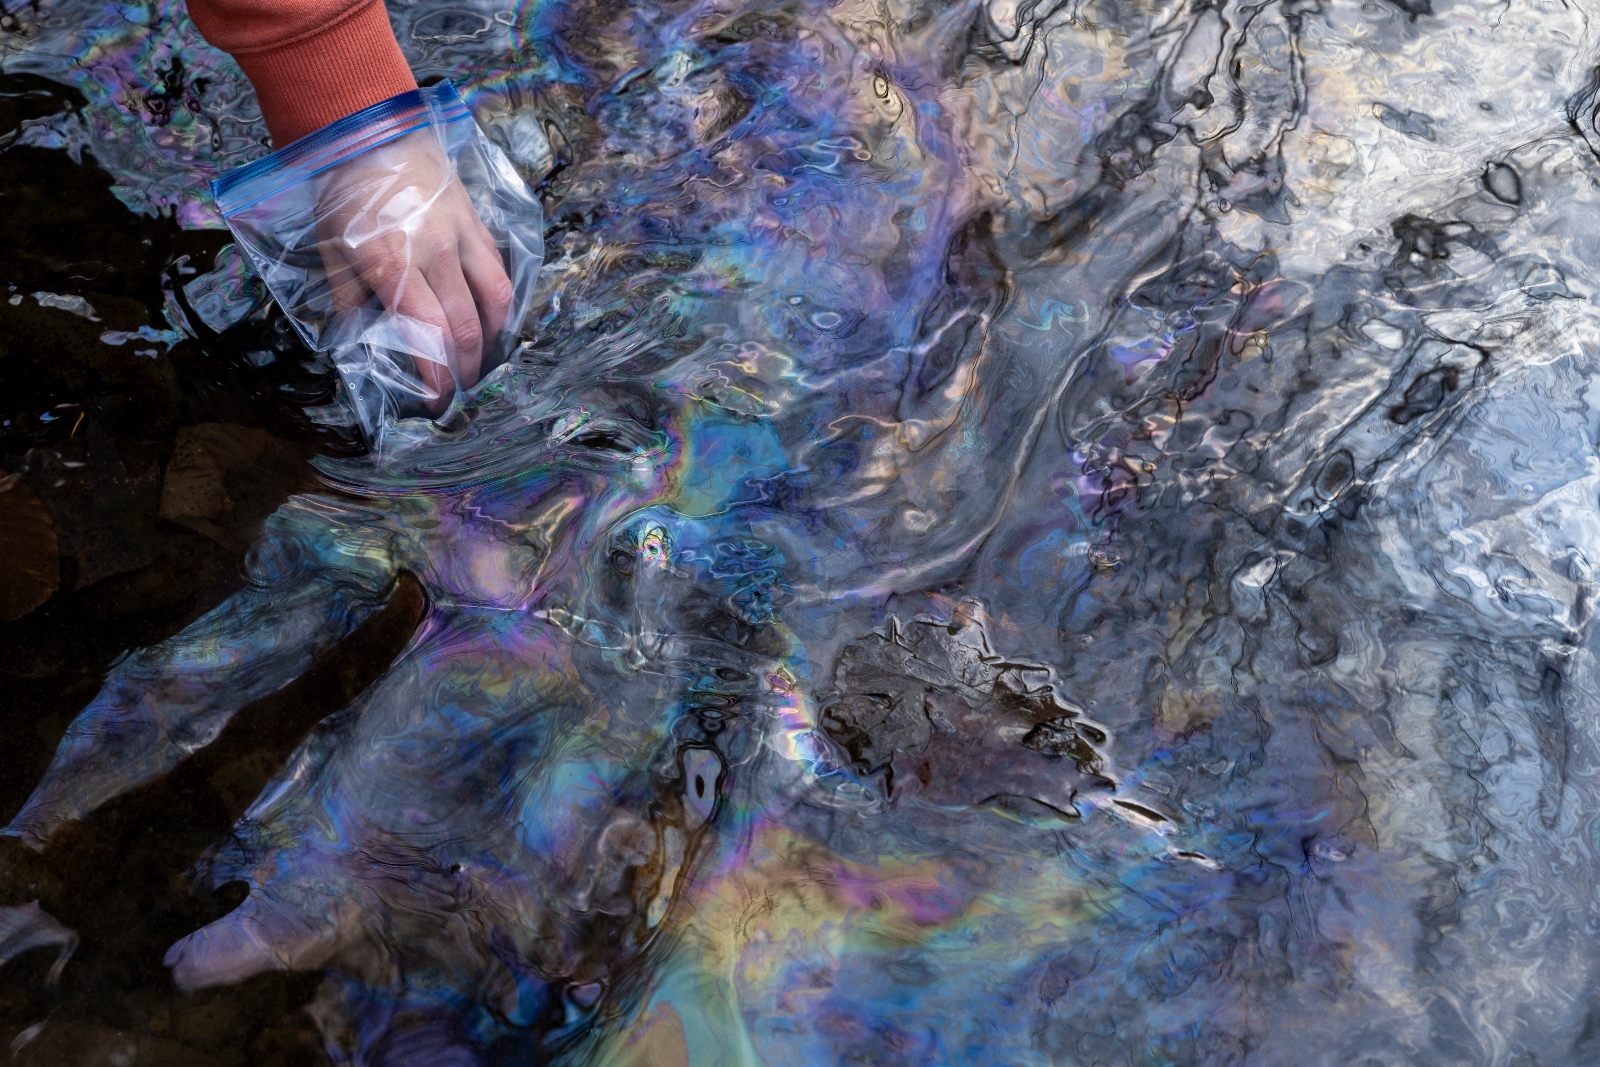 A ziploc-clad hand reaching into a polluted creek to get a water sample for testing